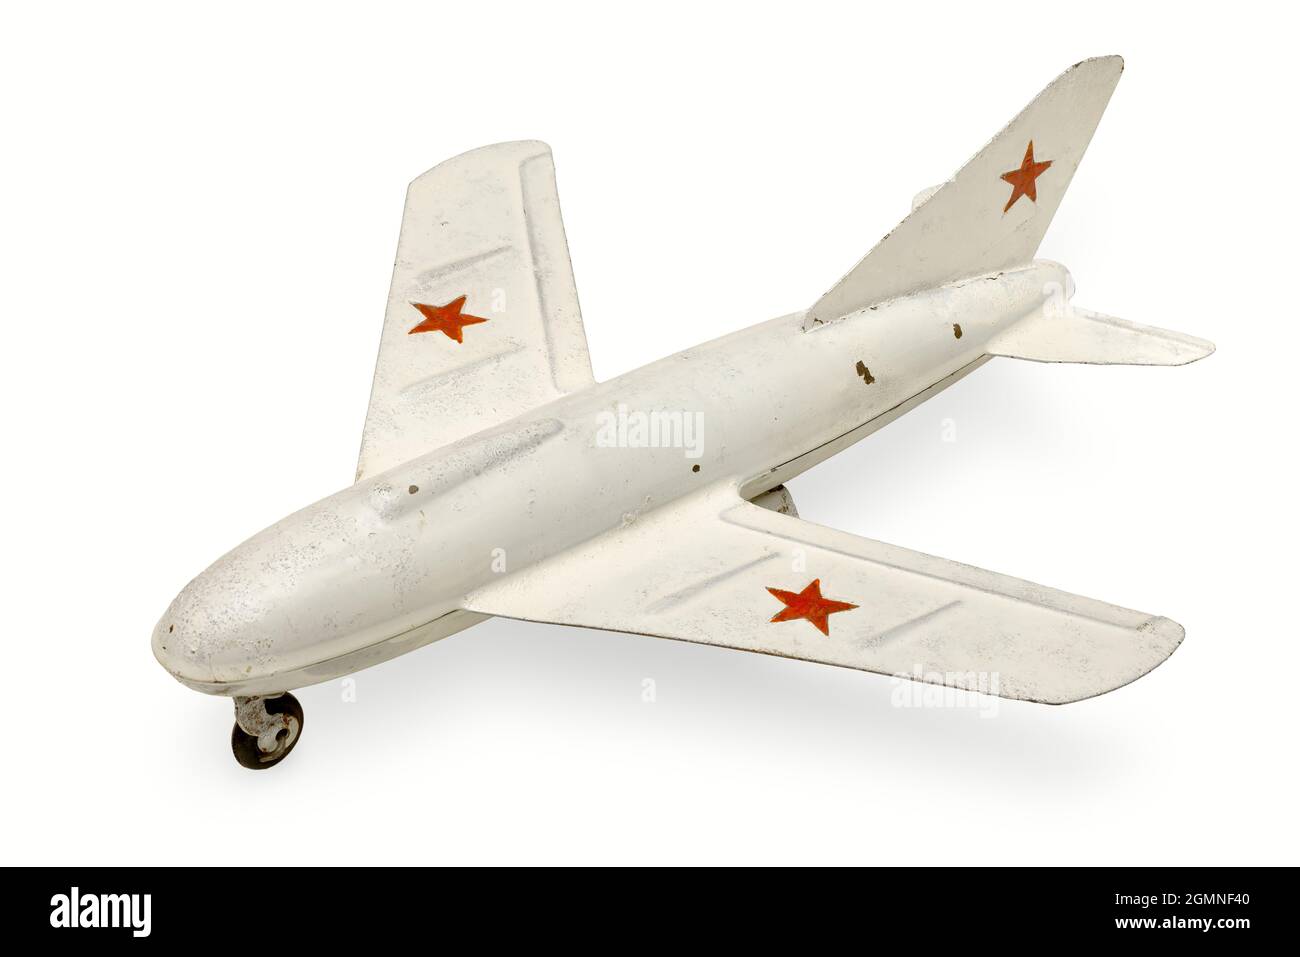 Isolated objects: old tin toy airplane, generic soviet jet fighter, on white background Stock Photo